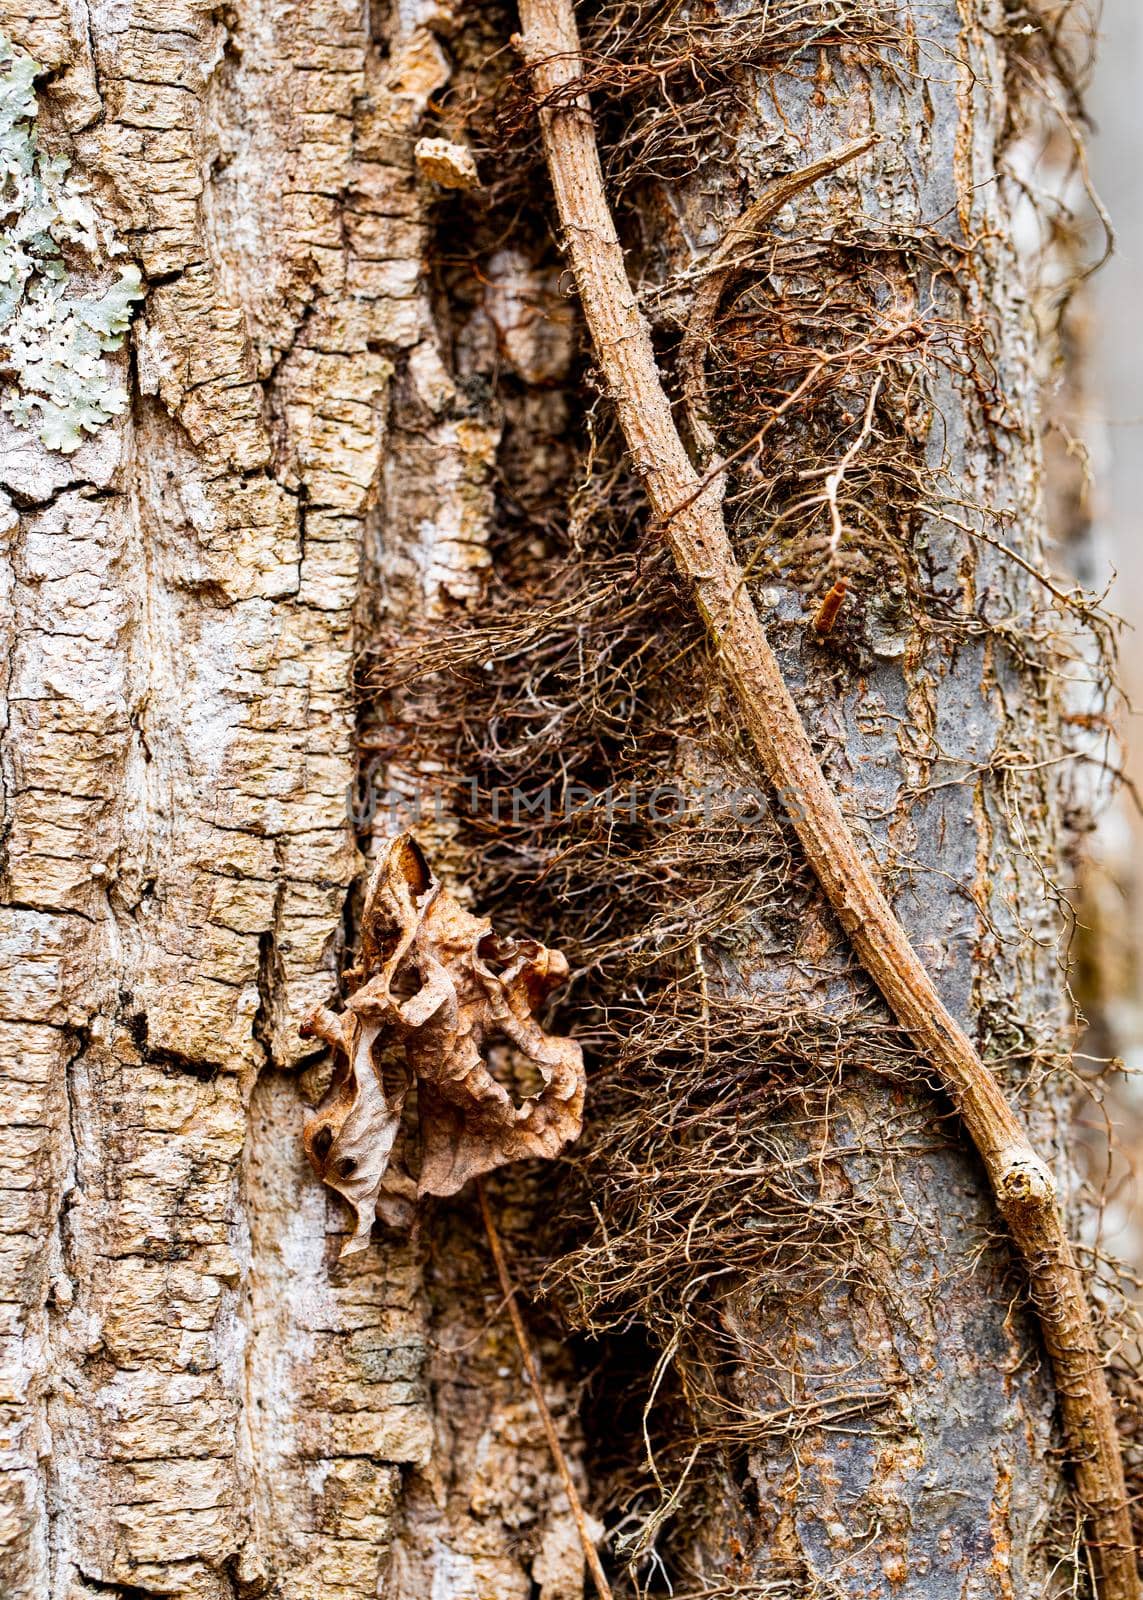 Closeup view of a vine growing on a hardwood tree turnk.